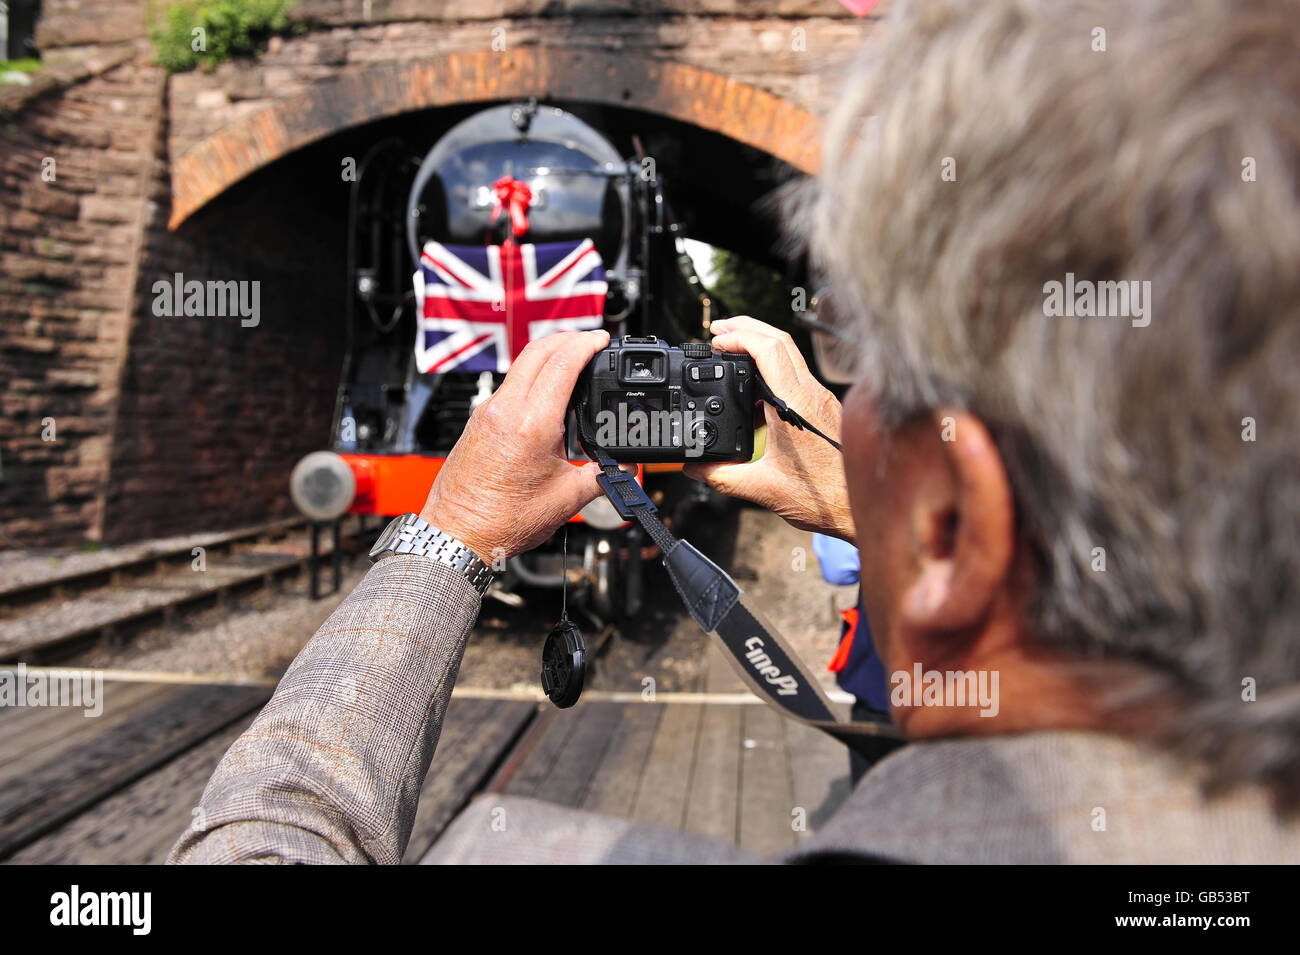 A railway enthusiast takes photos of the launch of the latest Southern Railway West Country Class locomotive No. 34046 named Braunton at Lydeard station near Taunton, Somerset after an extensive renovation project. Stock Photo